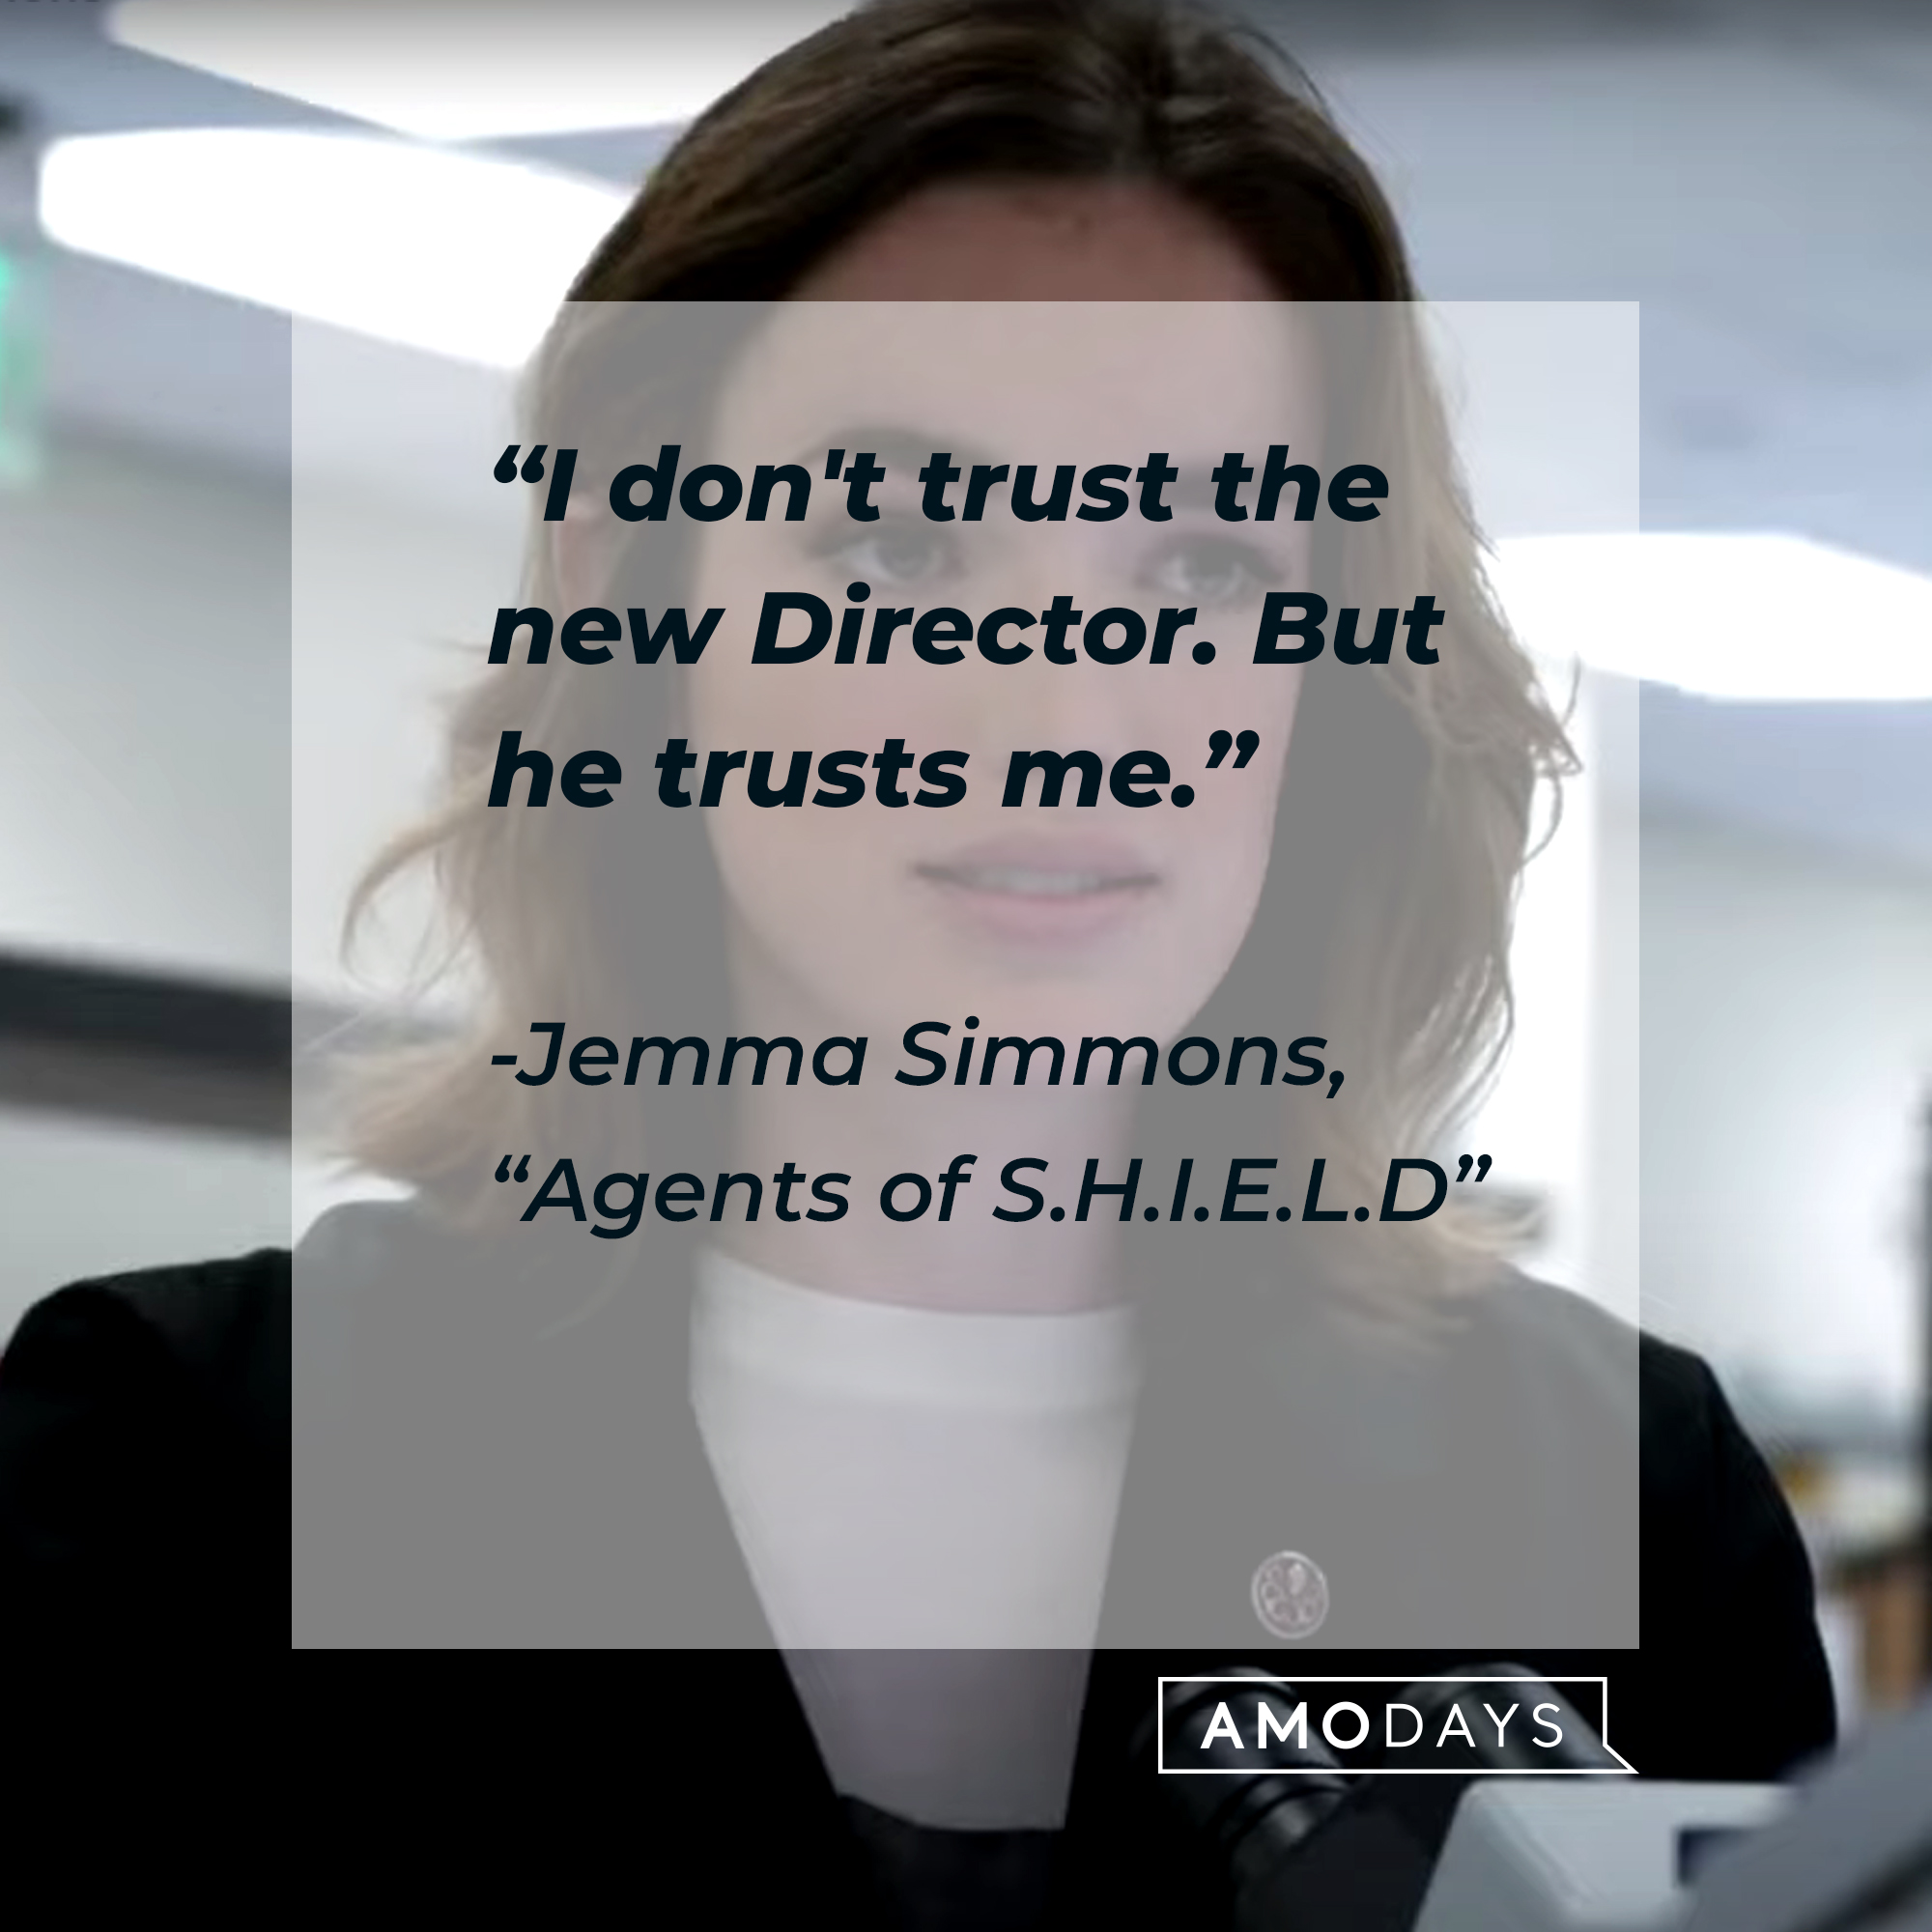 Jemma Simmons with her quote from "Agents of S.H.I.E.L.D.:" “I don't trust the new Director. But he trusts me.” | Source: Facebook.com/AgentsofShield